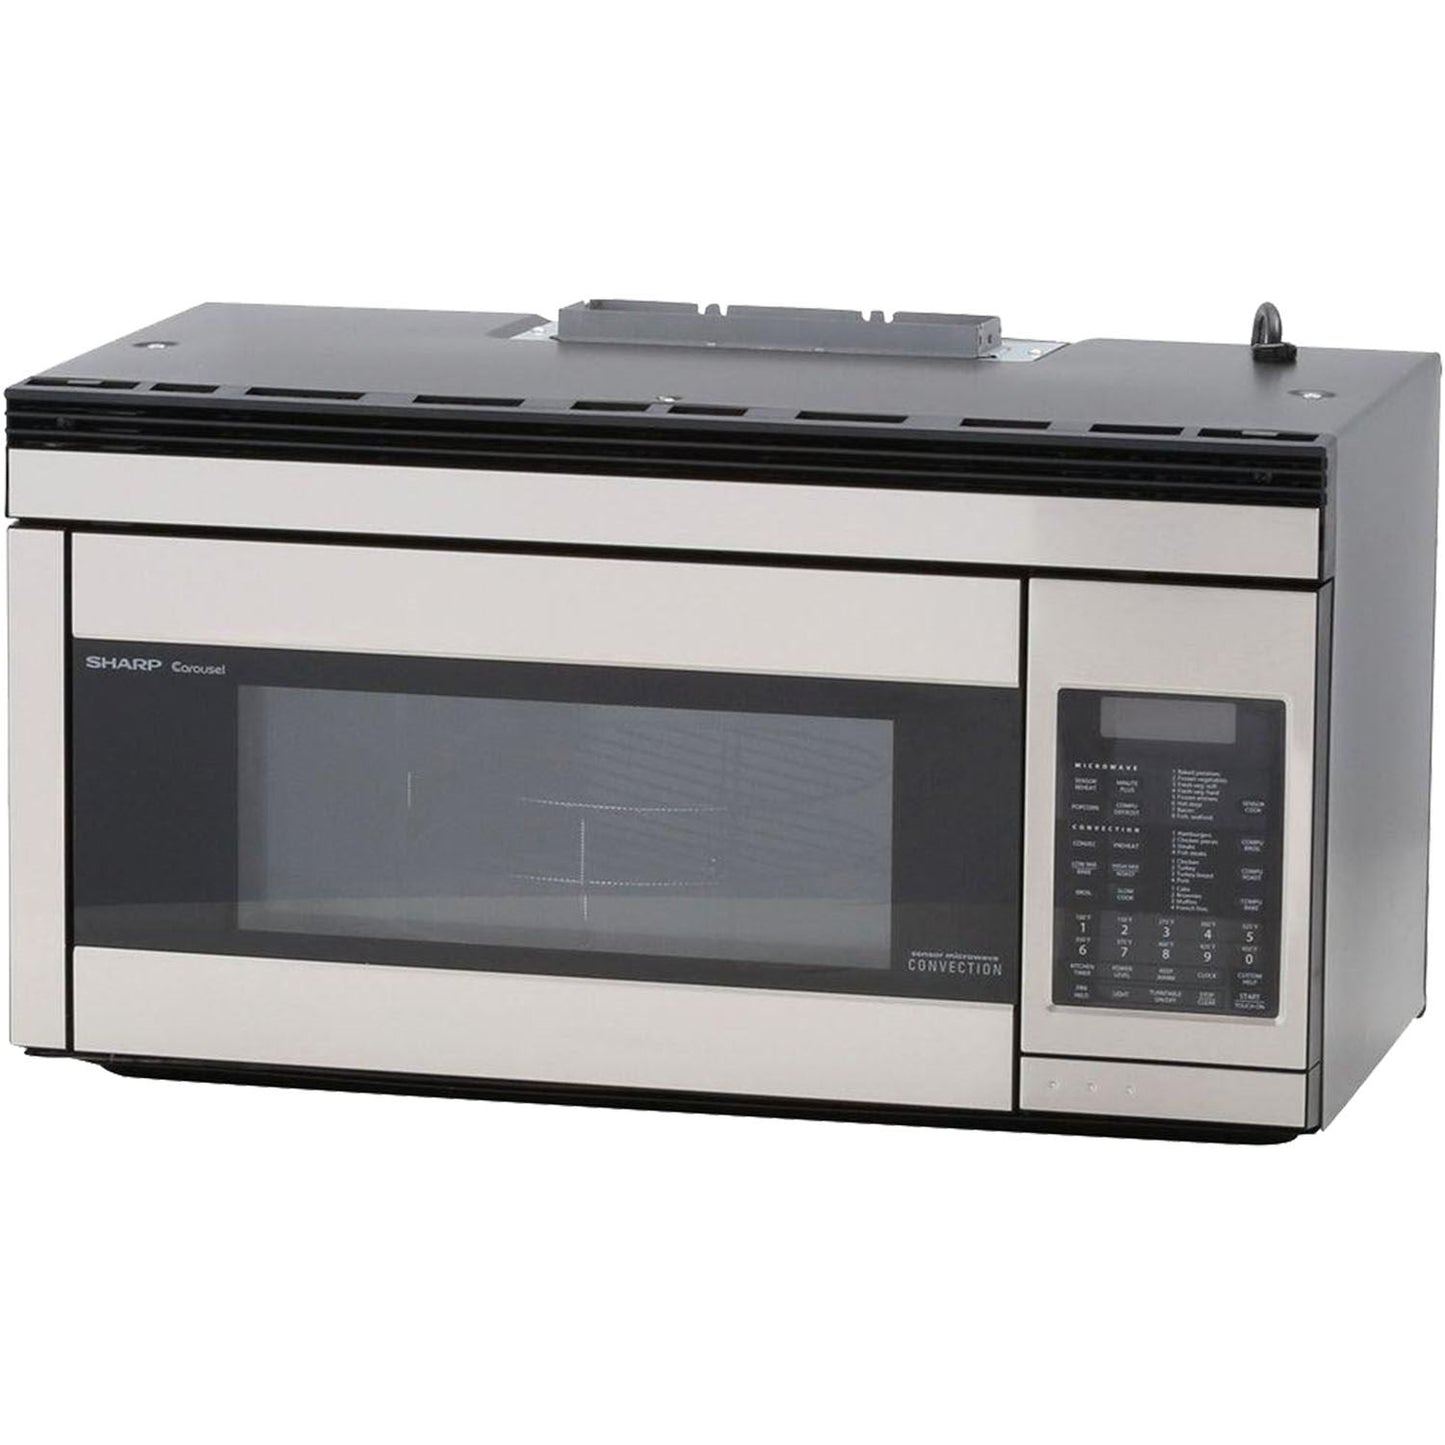 Sharp 30" R1874T 1.1-cu. ft. Stainless Steel 850W Over-the-Range Convection Microwave Oven